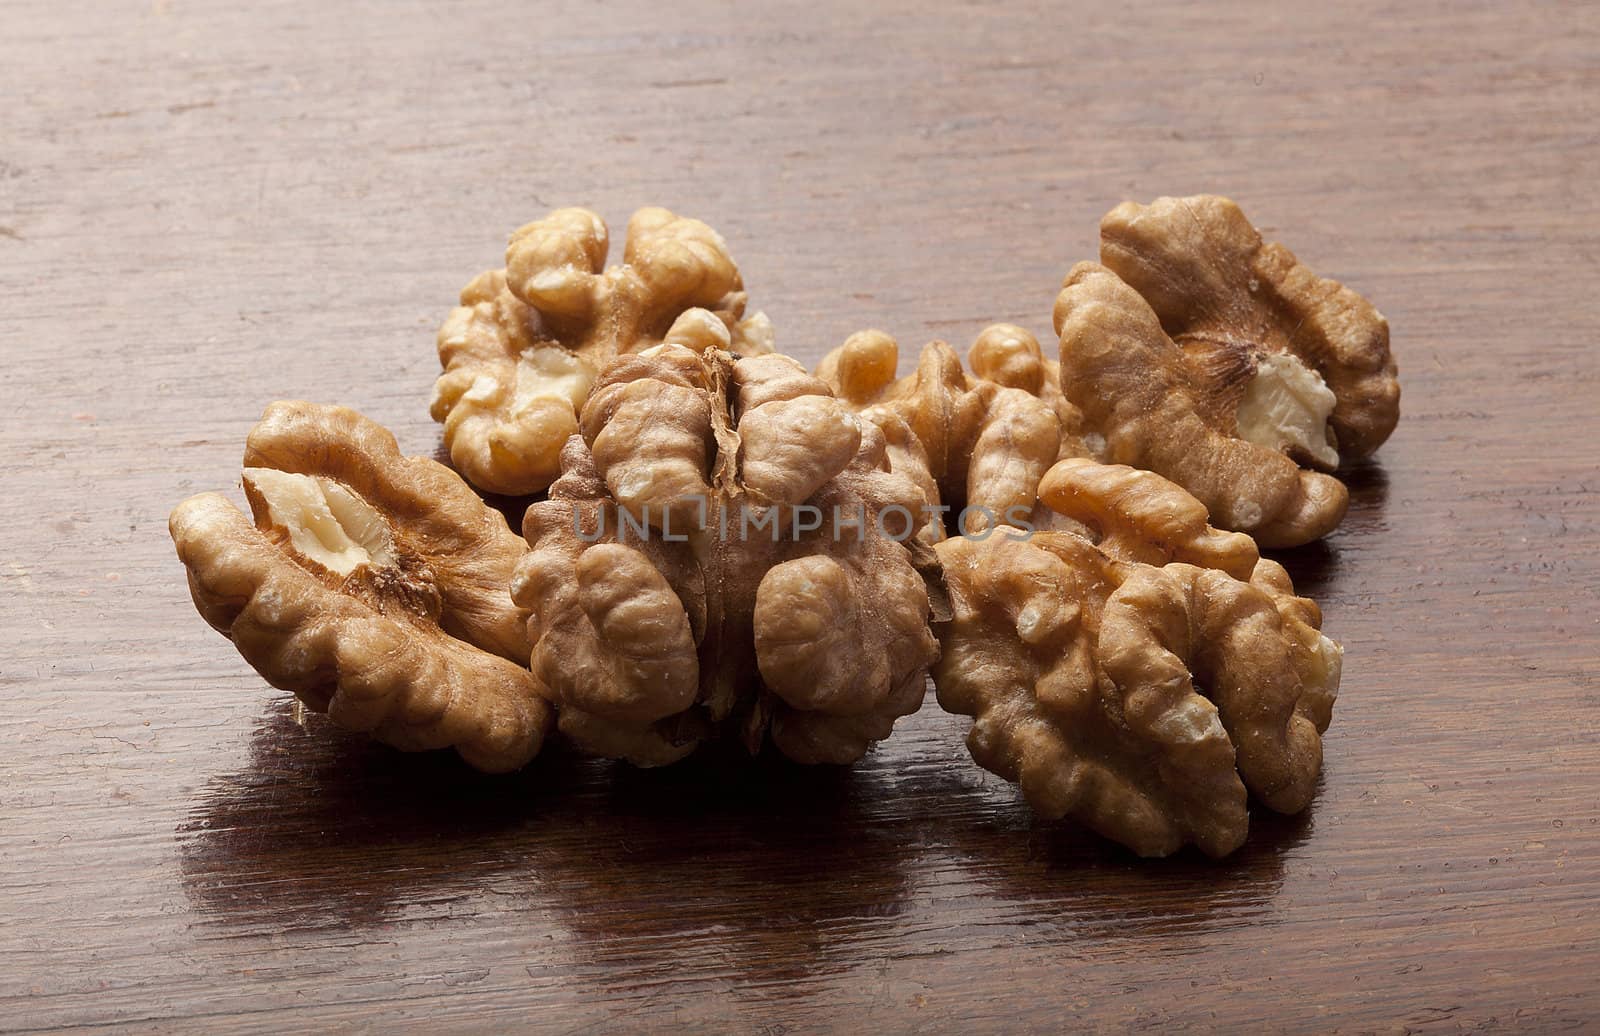 Handful of walnut on the wooden table